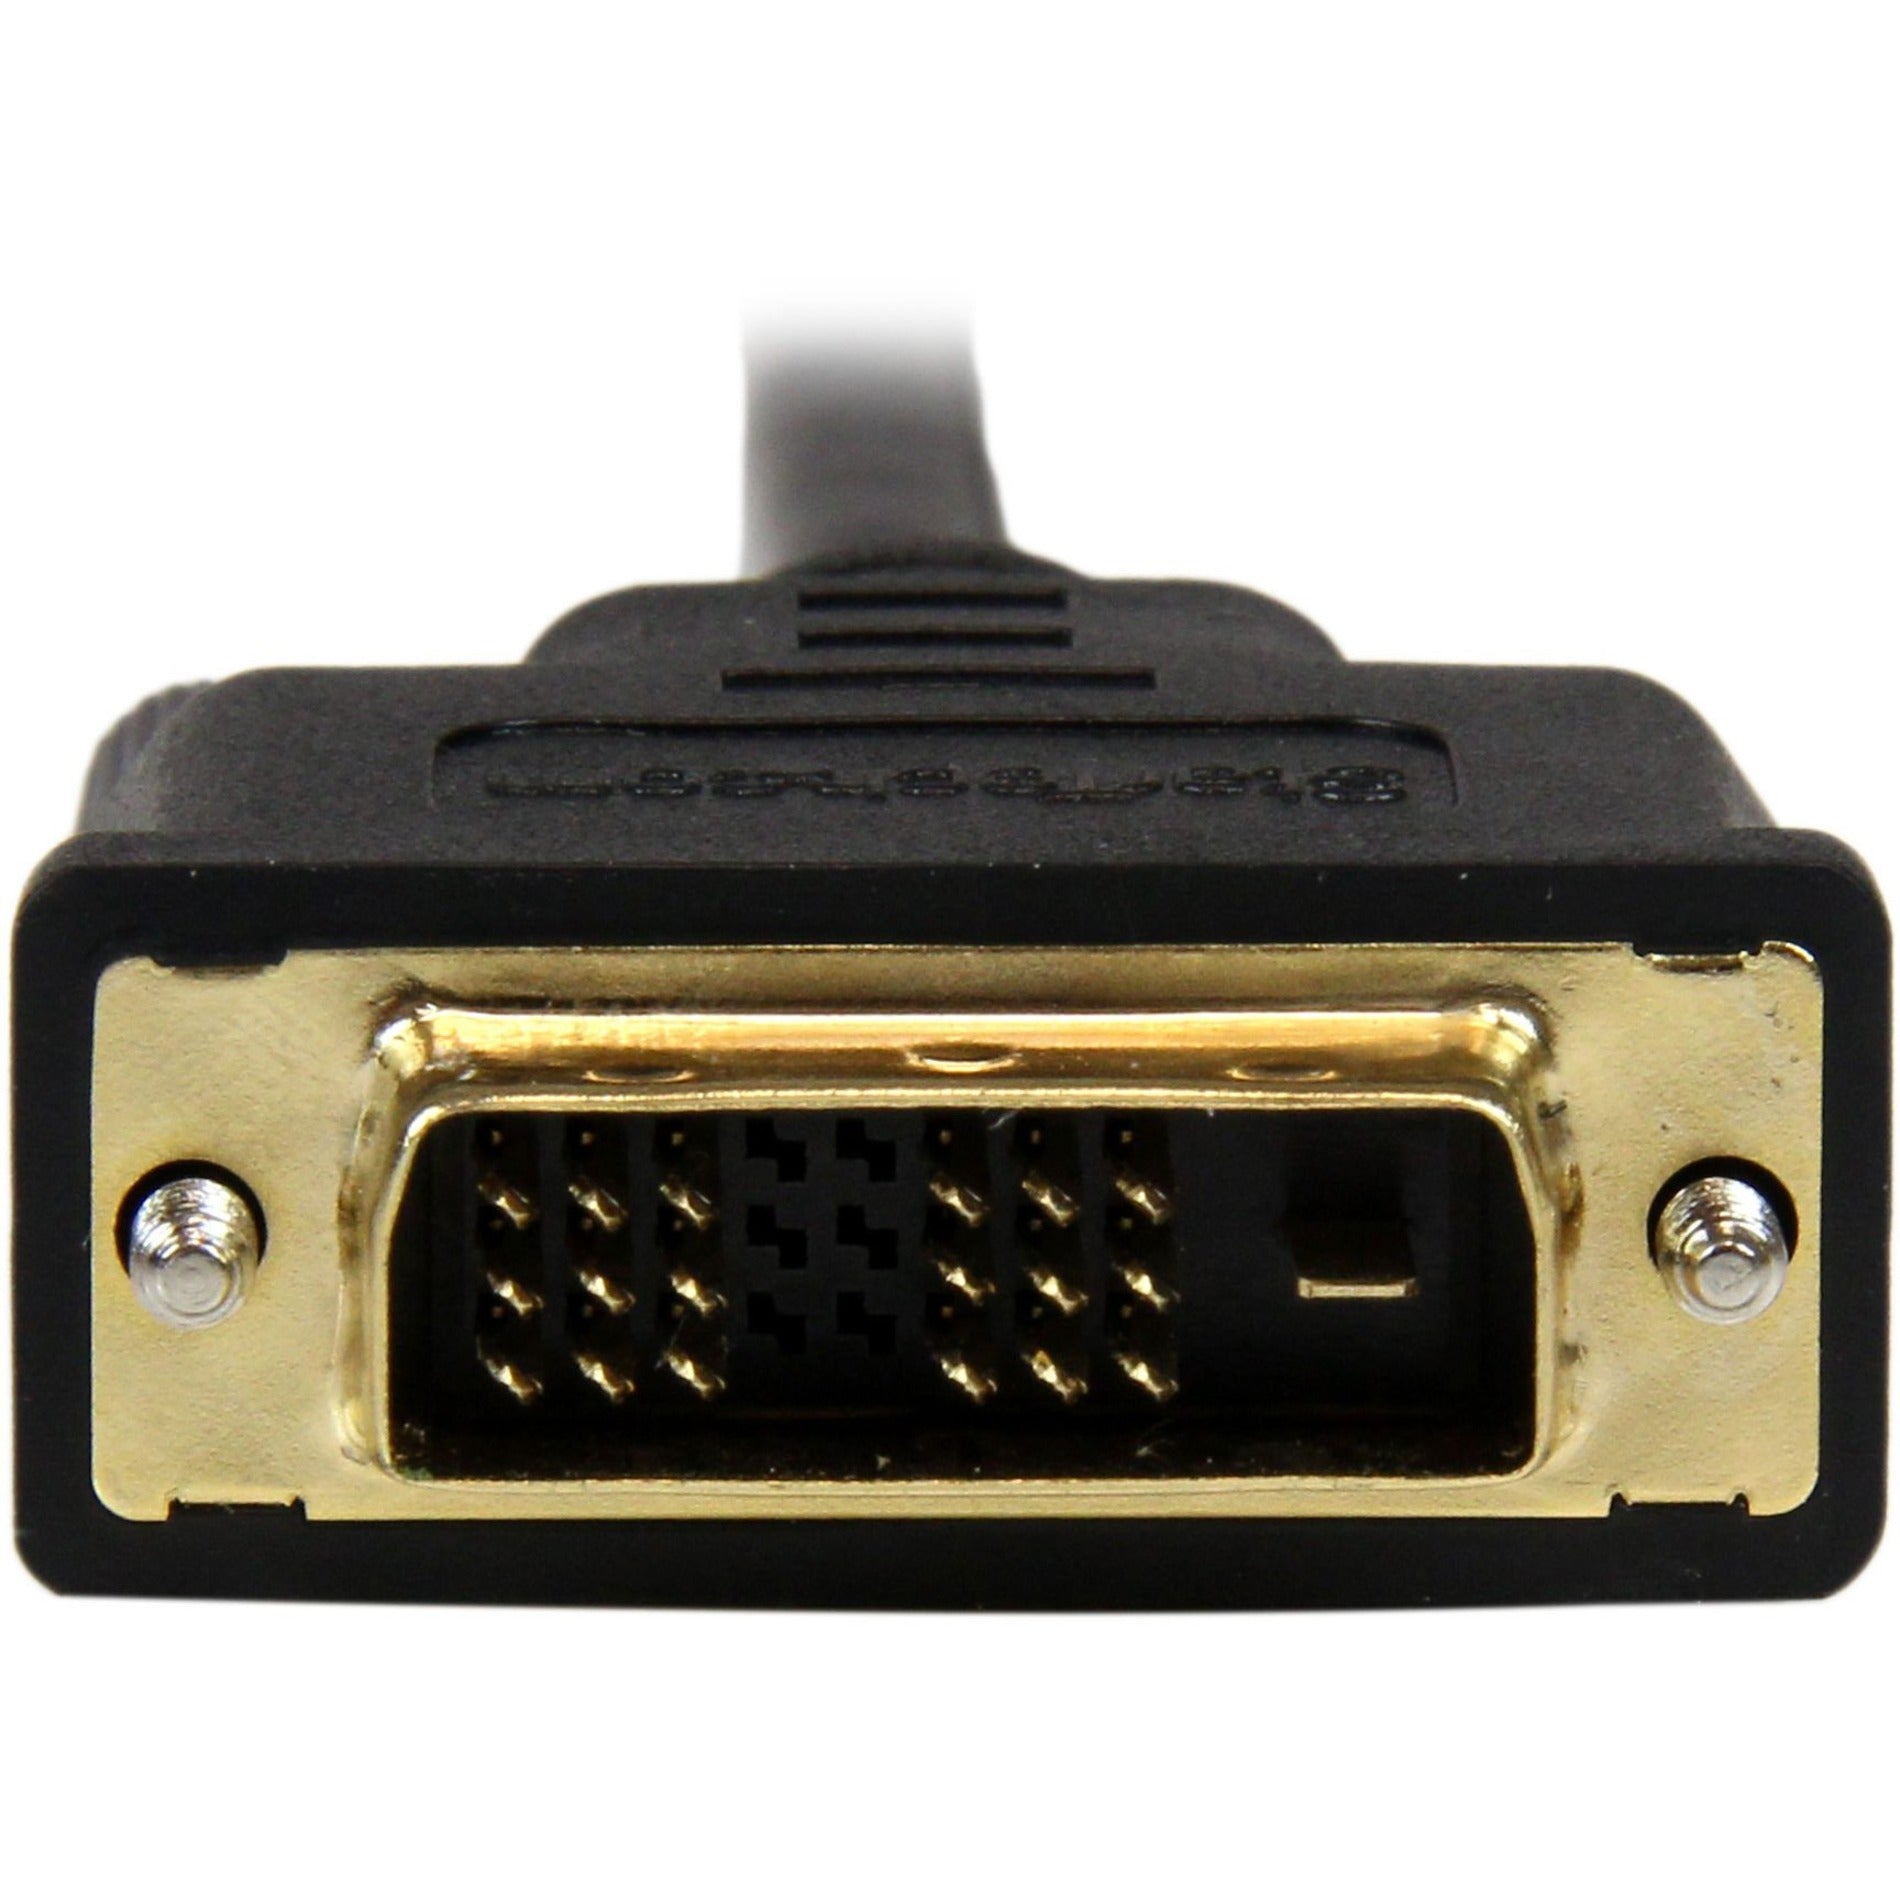 StarTech.com HDCDVIMM2M 2m Mini HDMI to DVI-D Cable - M/M, Active, Passive, EMI Protection, Fray Resistant, Damage Resistant, Molded, Strain Relief, 6.56 ft Cable Length, Gold Plated Connectors, 1920 x 1200 Supported Resolution